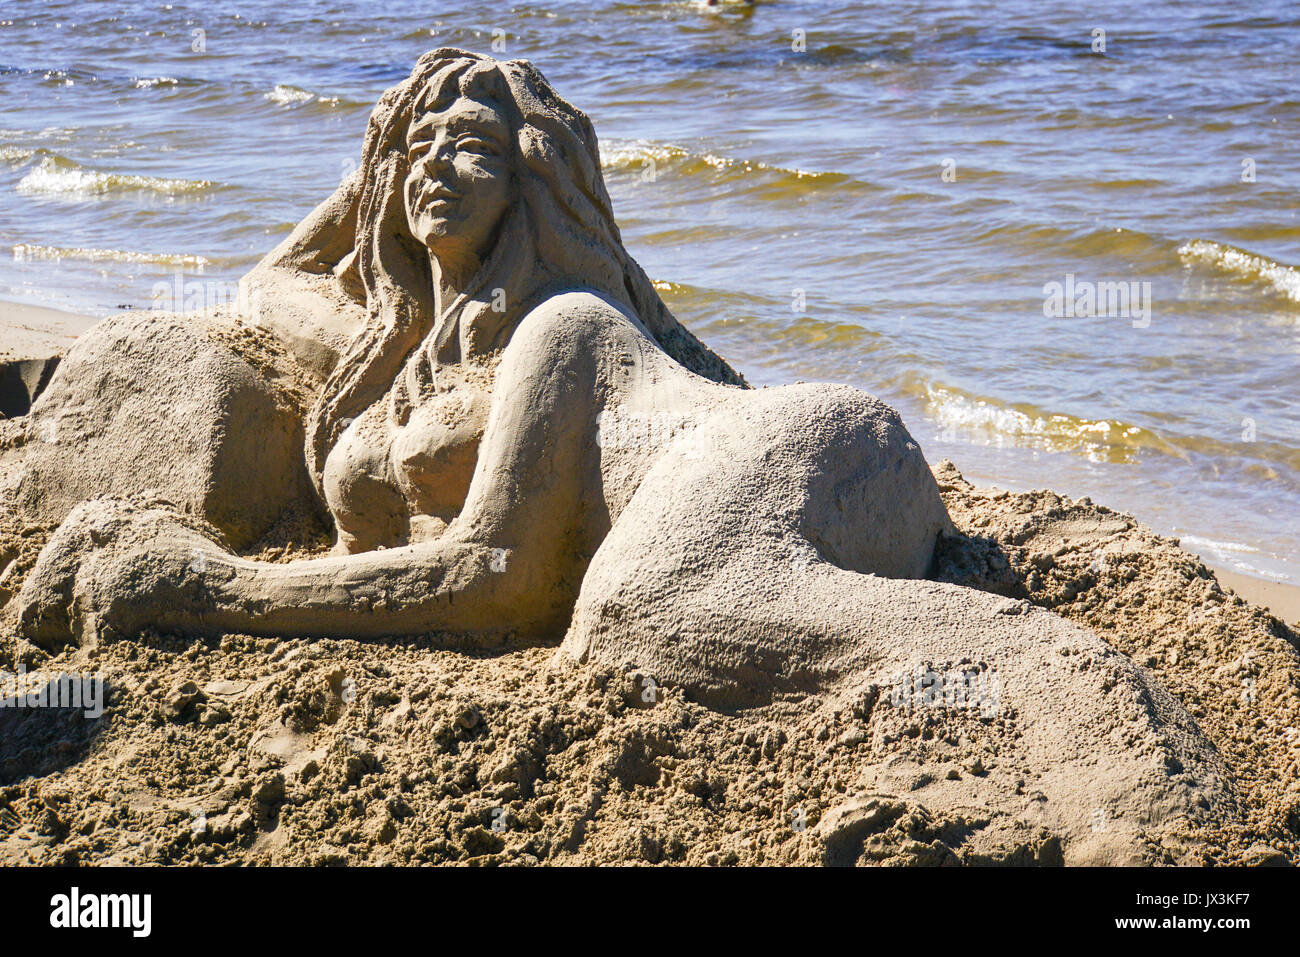 Artist makes a sand sculpture of a Mermaid. Photographed in Jurmala, Latvia Stock Photo